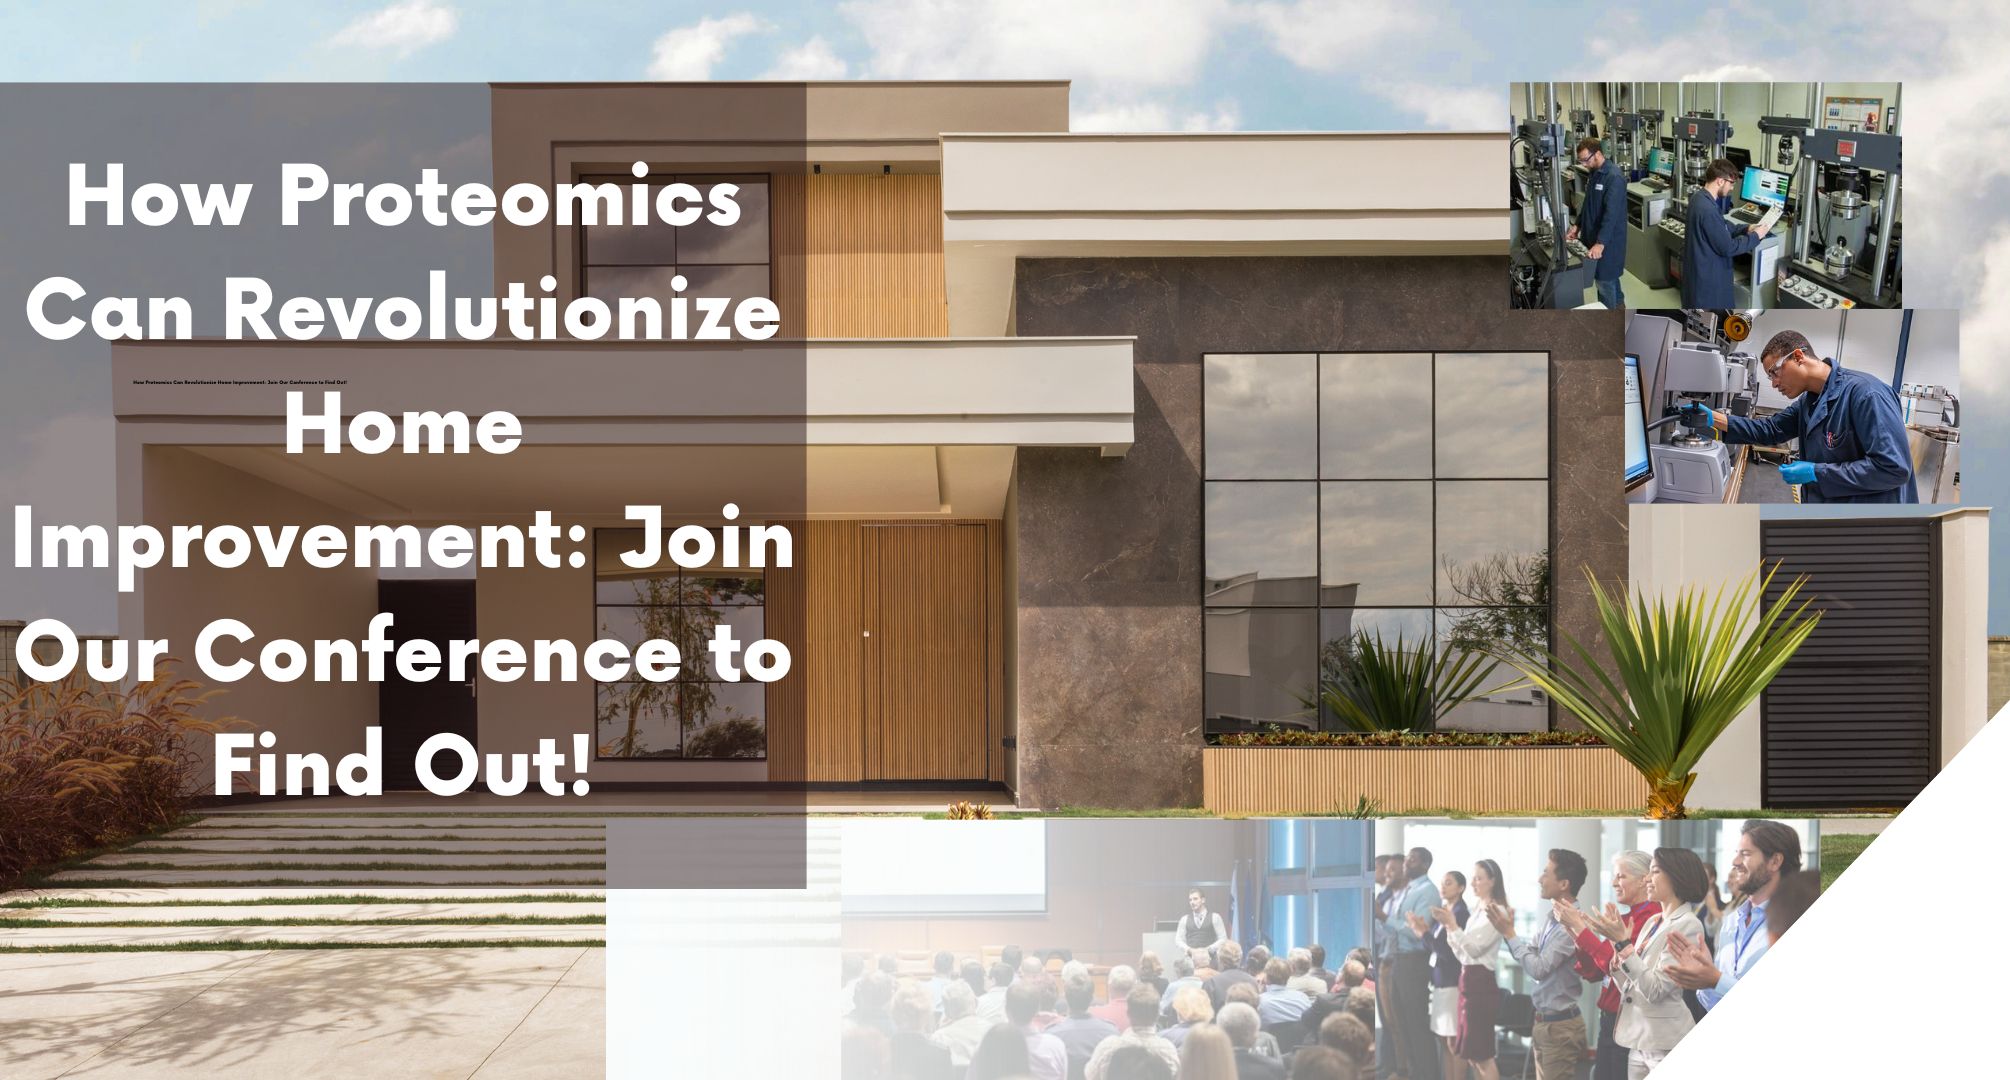 How Proteomics Can Revolutionize Home Improvement Join Our Conference to Find Out!